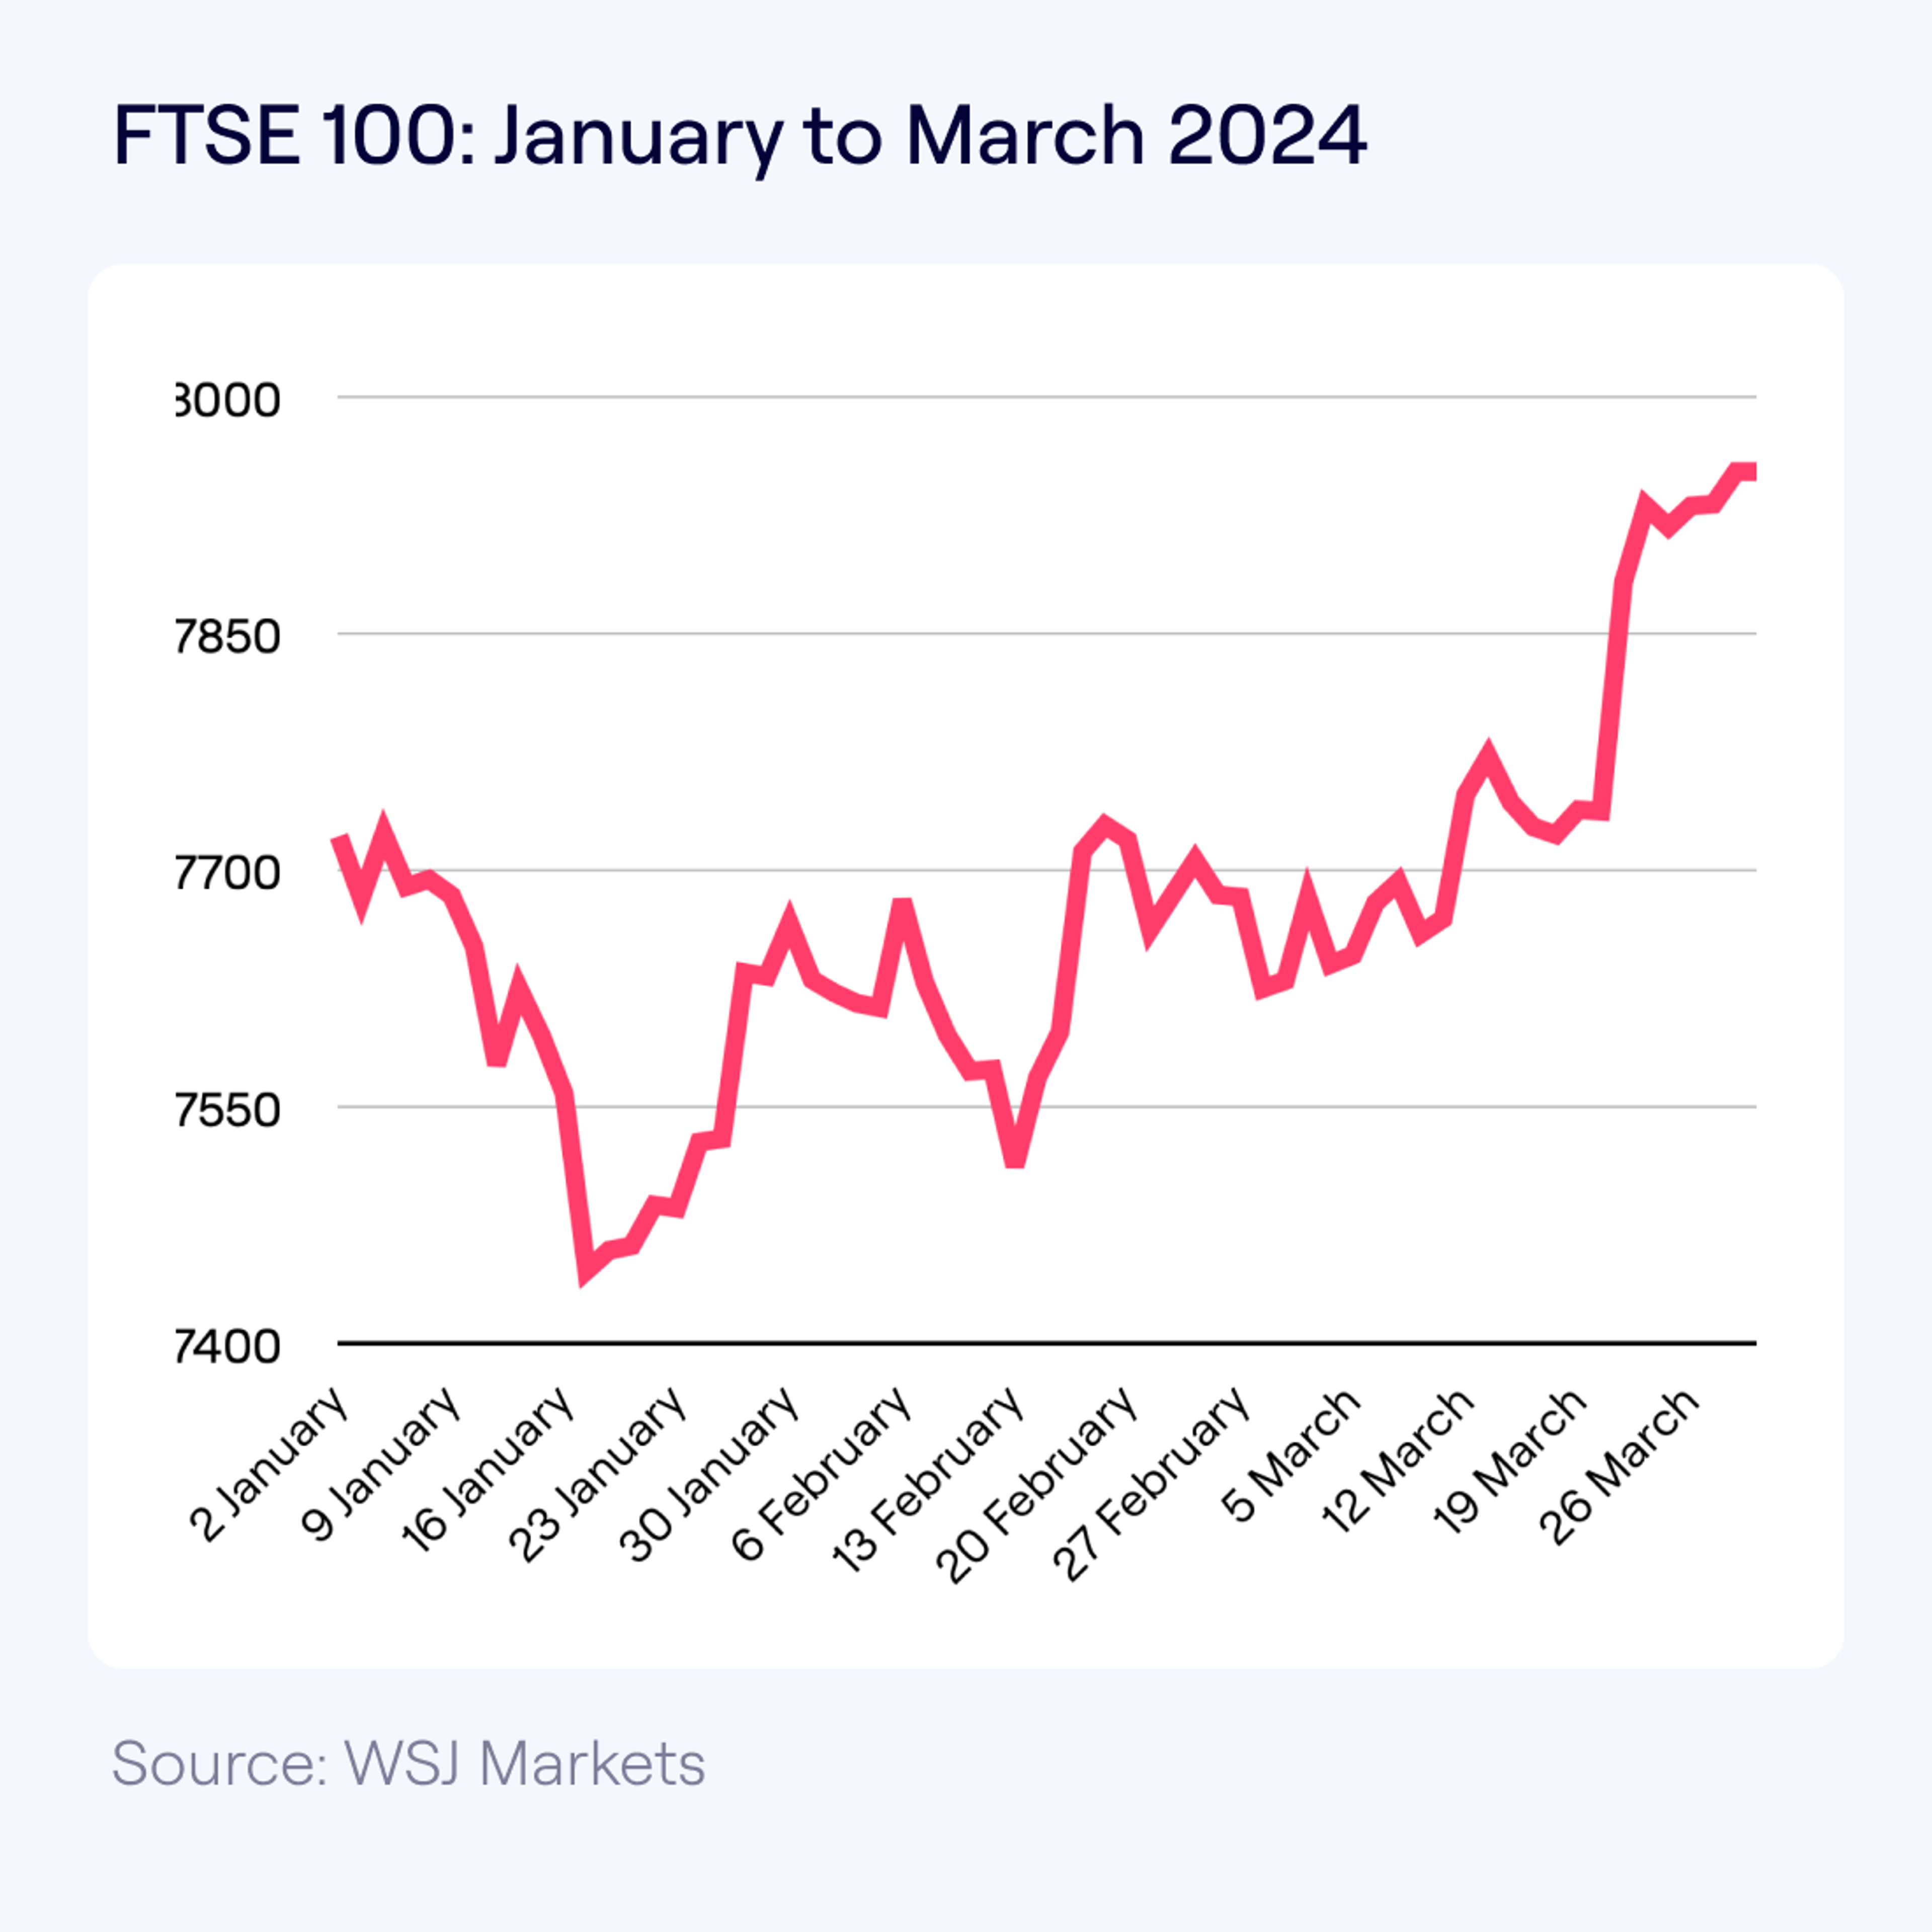 Line graph displaying the FTSE 100 index from January to March 2024. It shows a dip in mid January, followed by a recovery and a gradual upward trend through March.